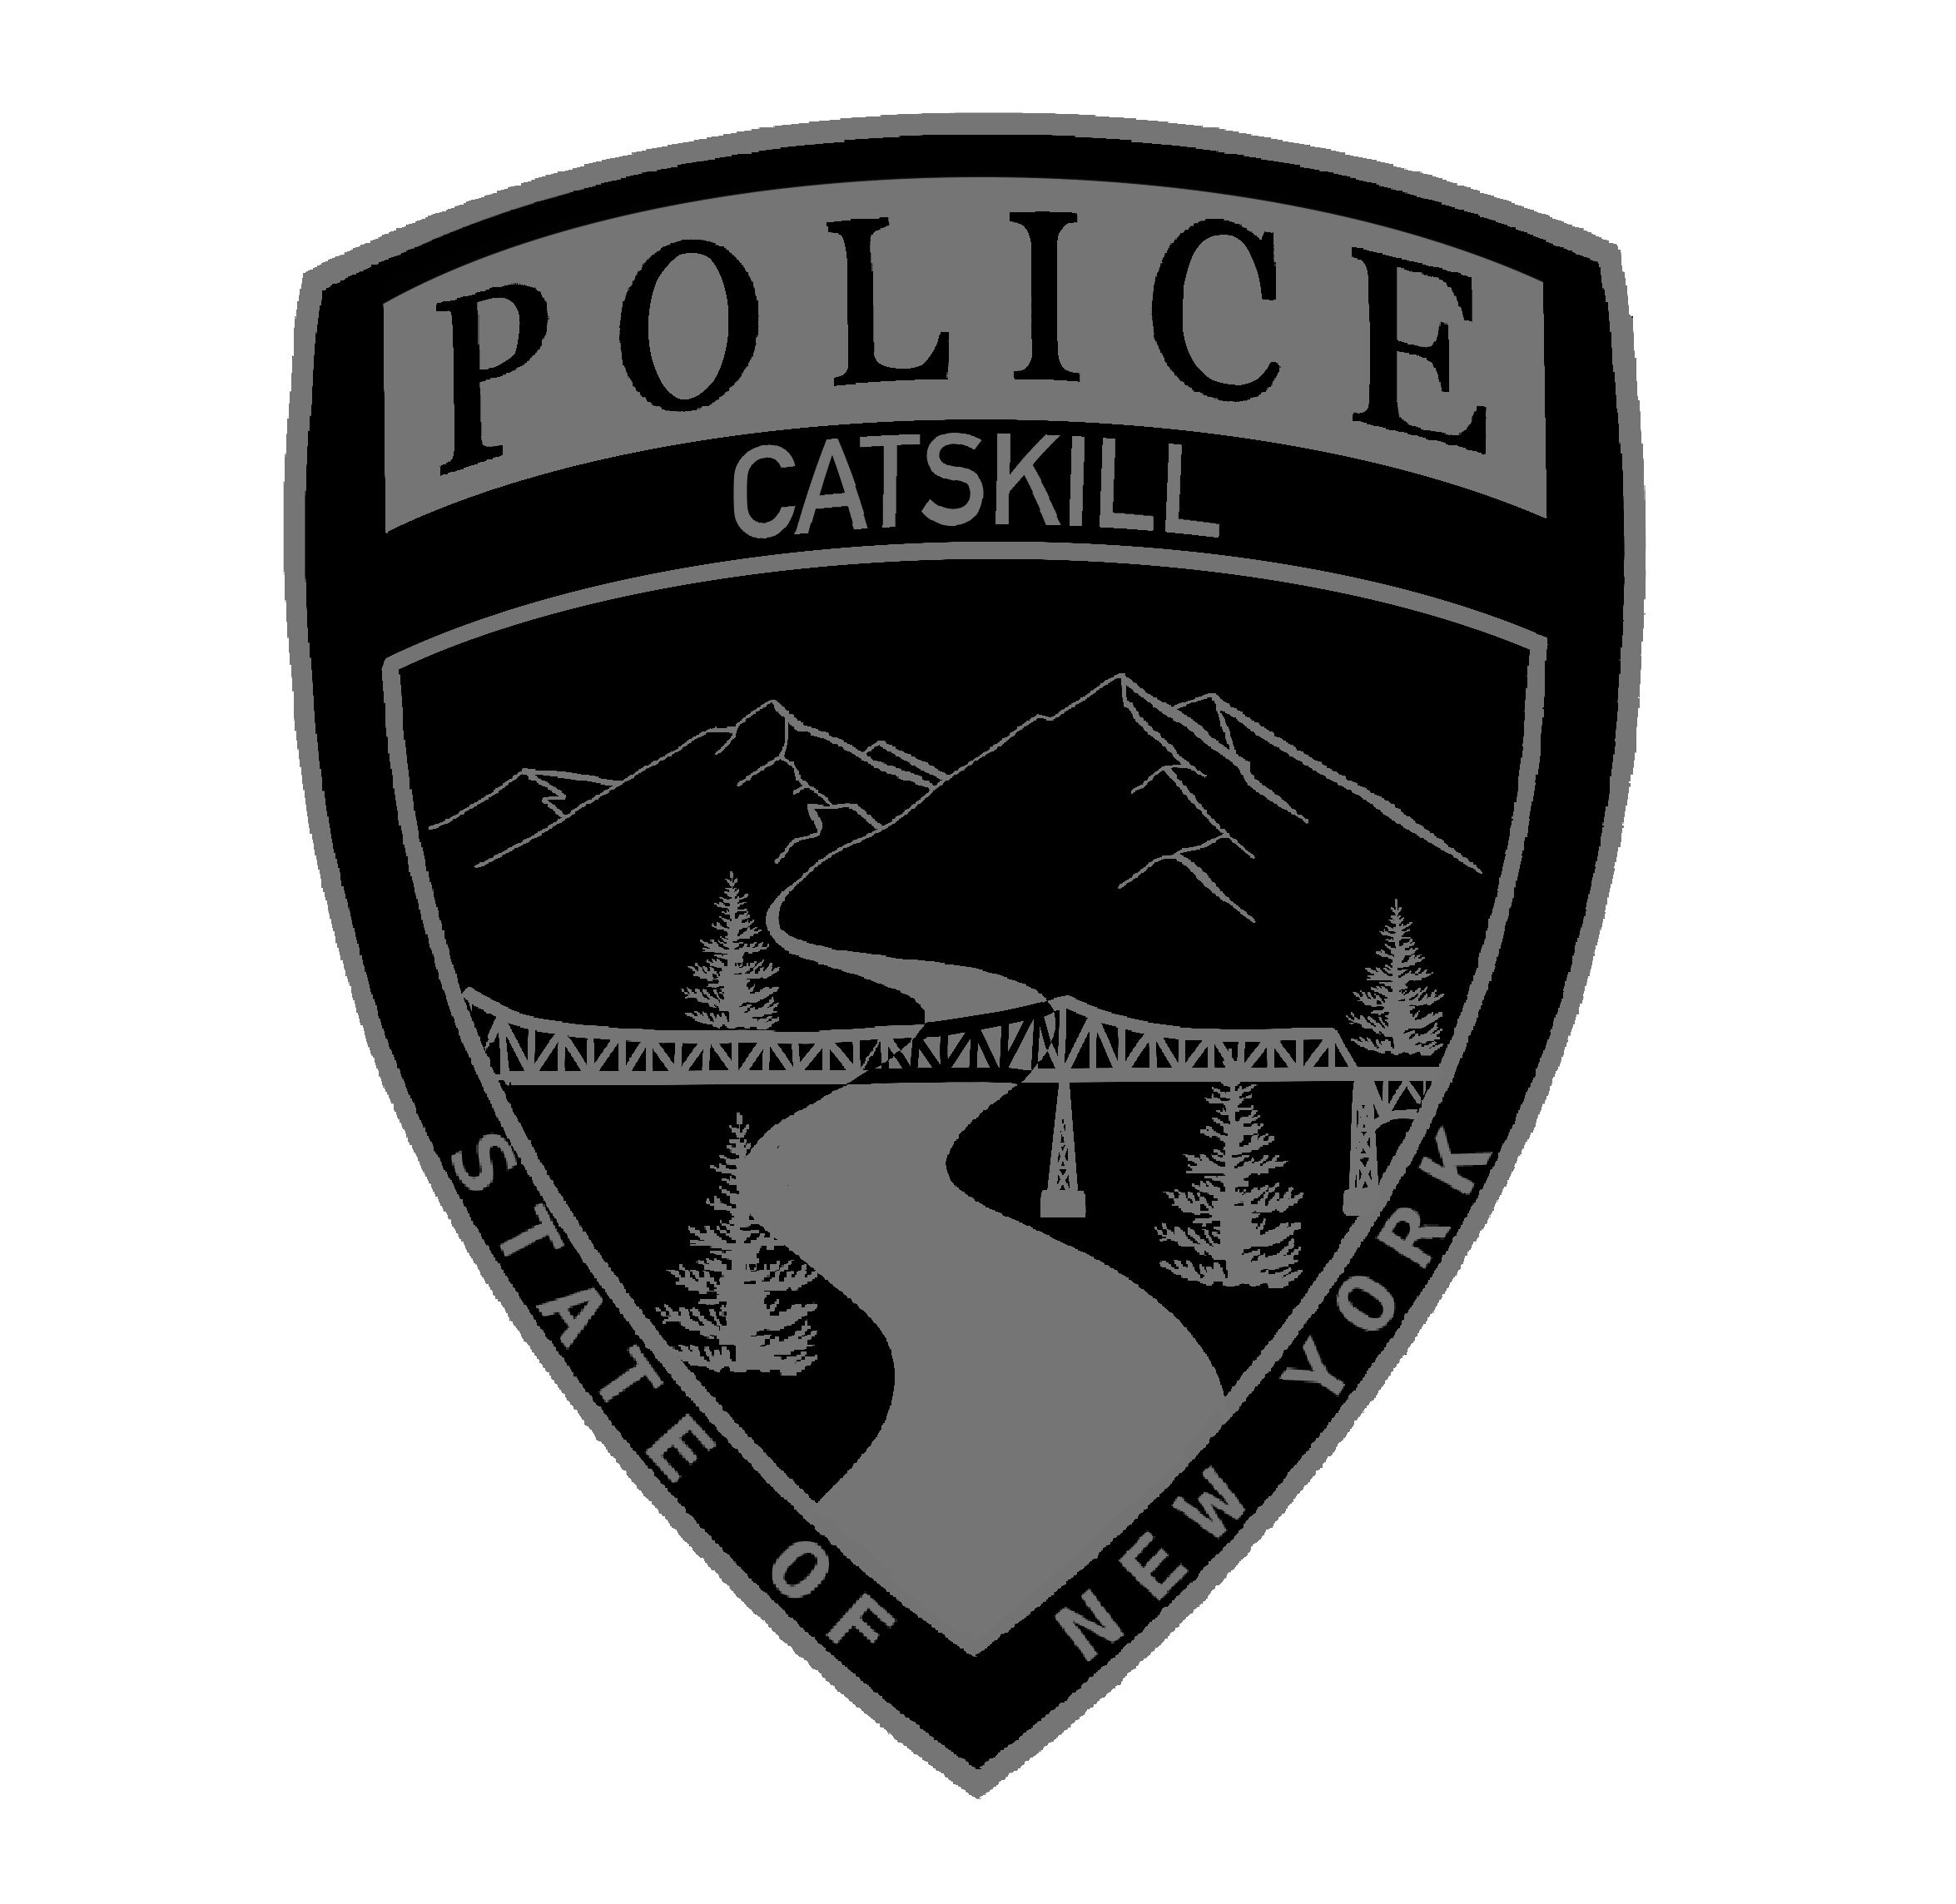 Catskill Police Patch showing river, bridge, and mountains